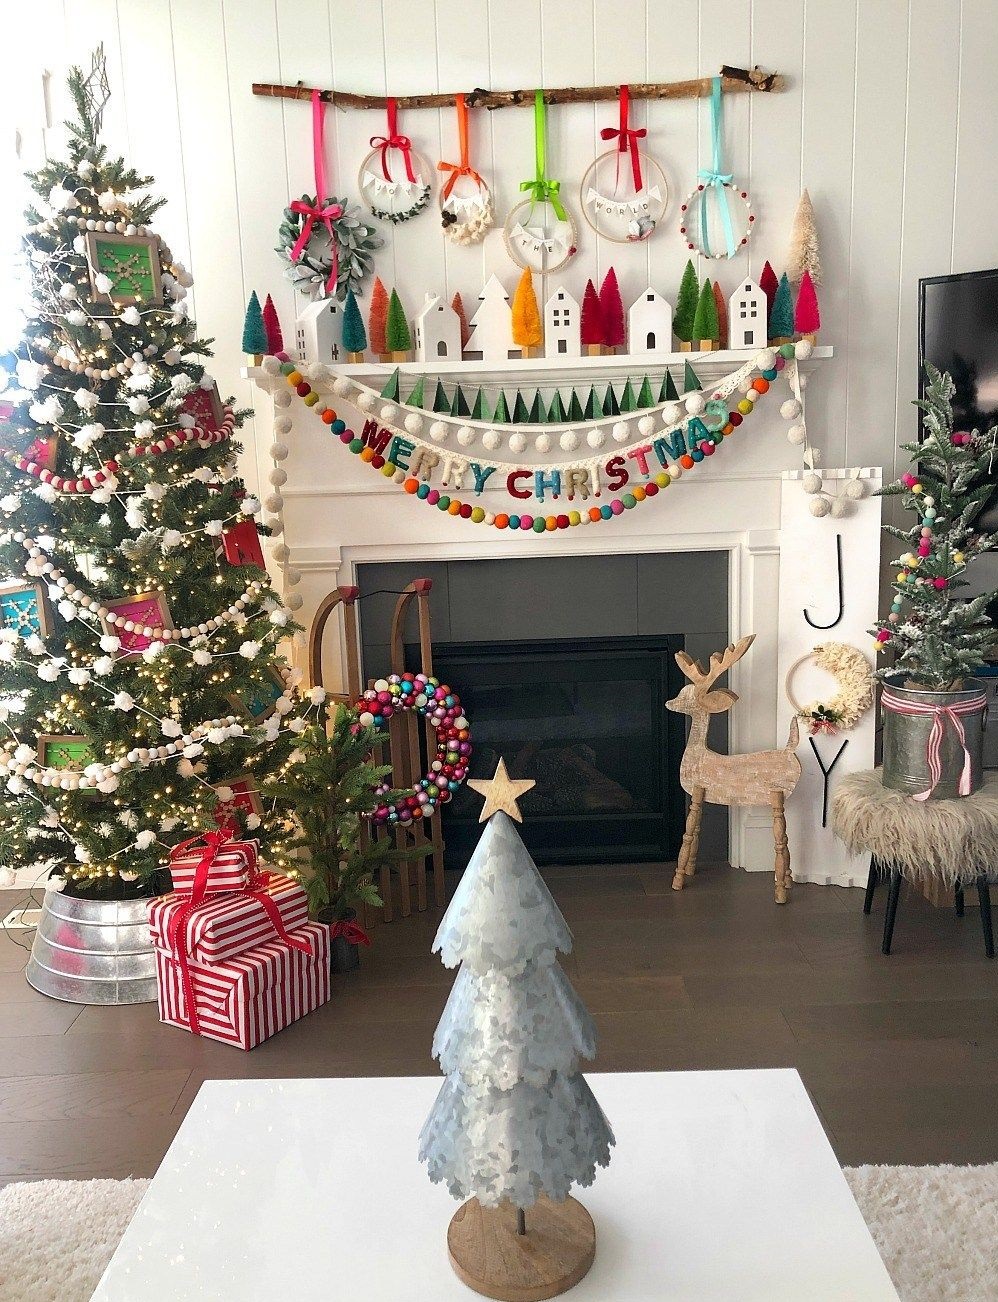 DIY-Christmas-living-room-decorations 70+ Creative Christmas Decorations to Do in 2021